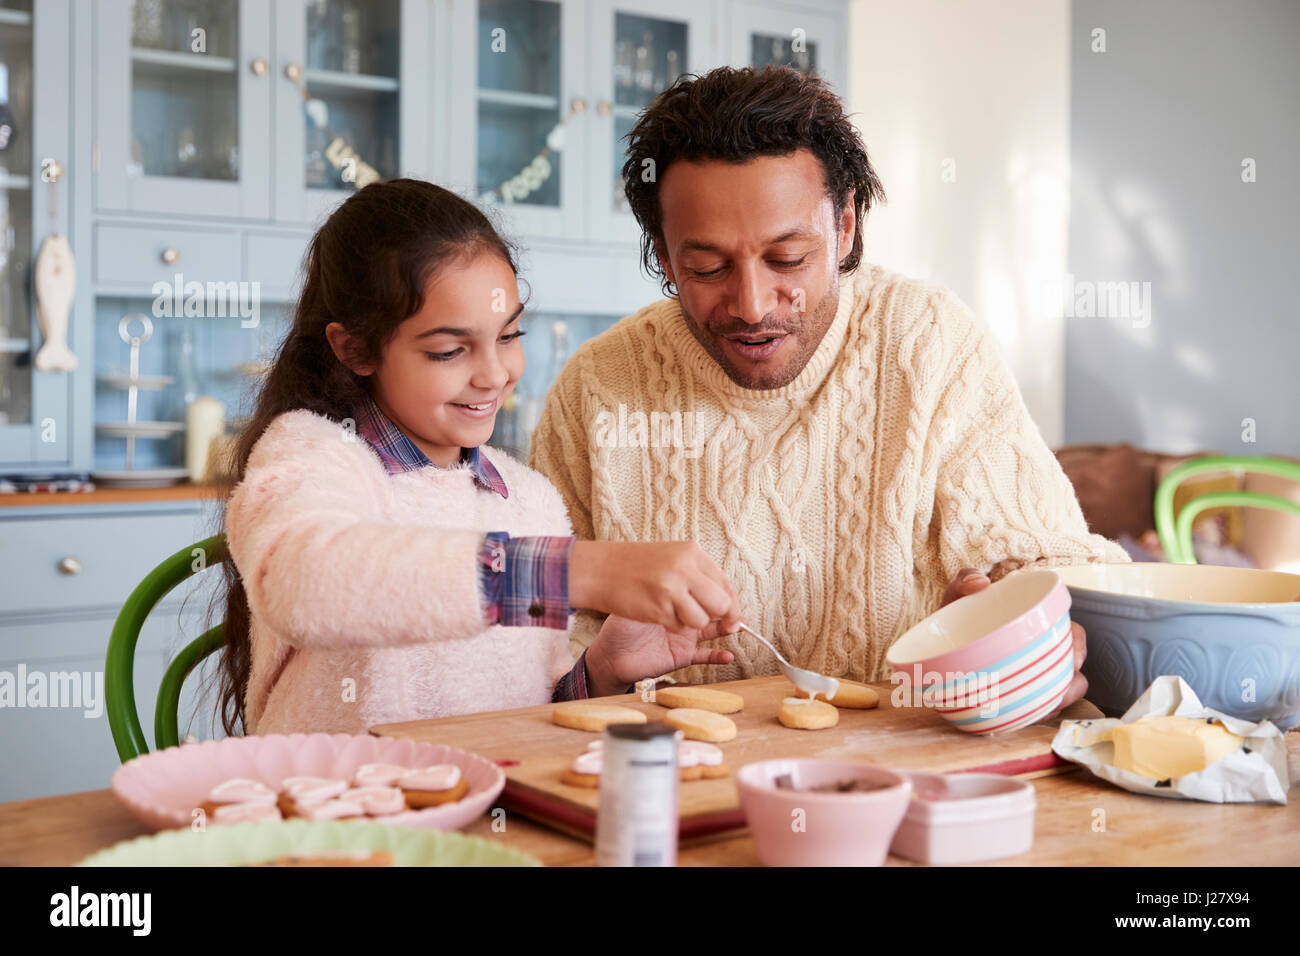 https://c8.alamy.com/comp/J27X94/father-and-daughter-decorating-cookies-at-home-together-J27X94.jpg